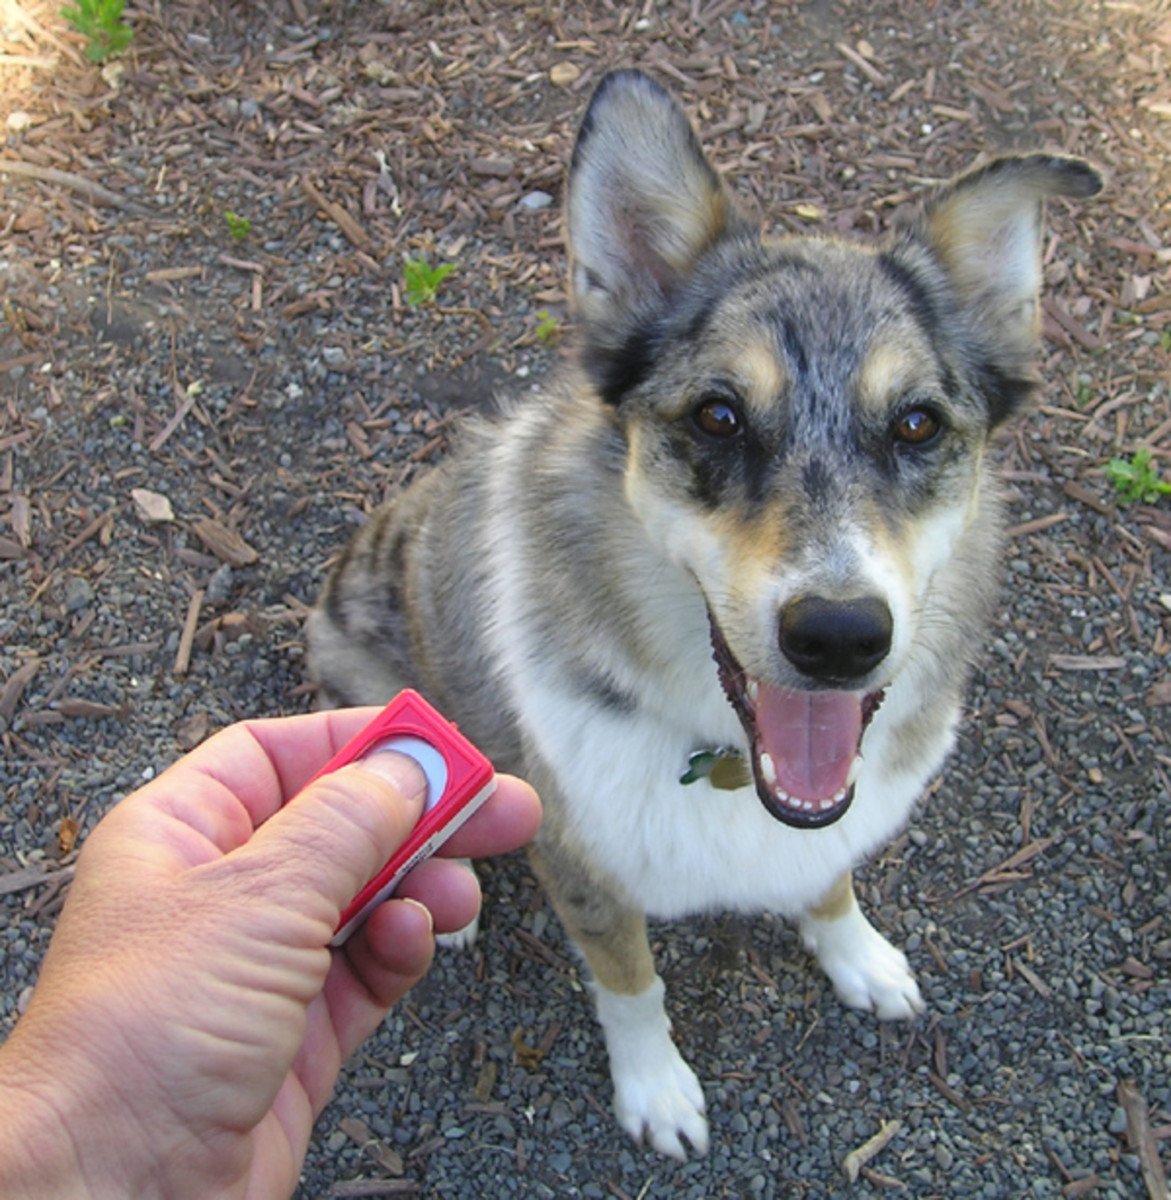 Clicker training can be very effective for some dogs. 